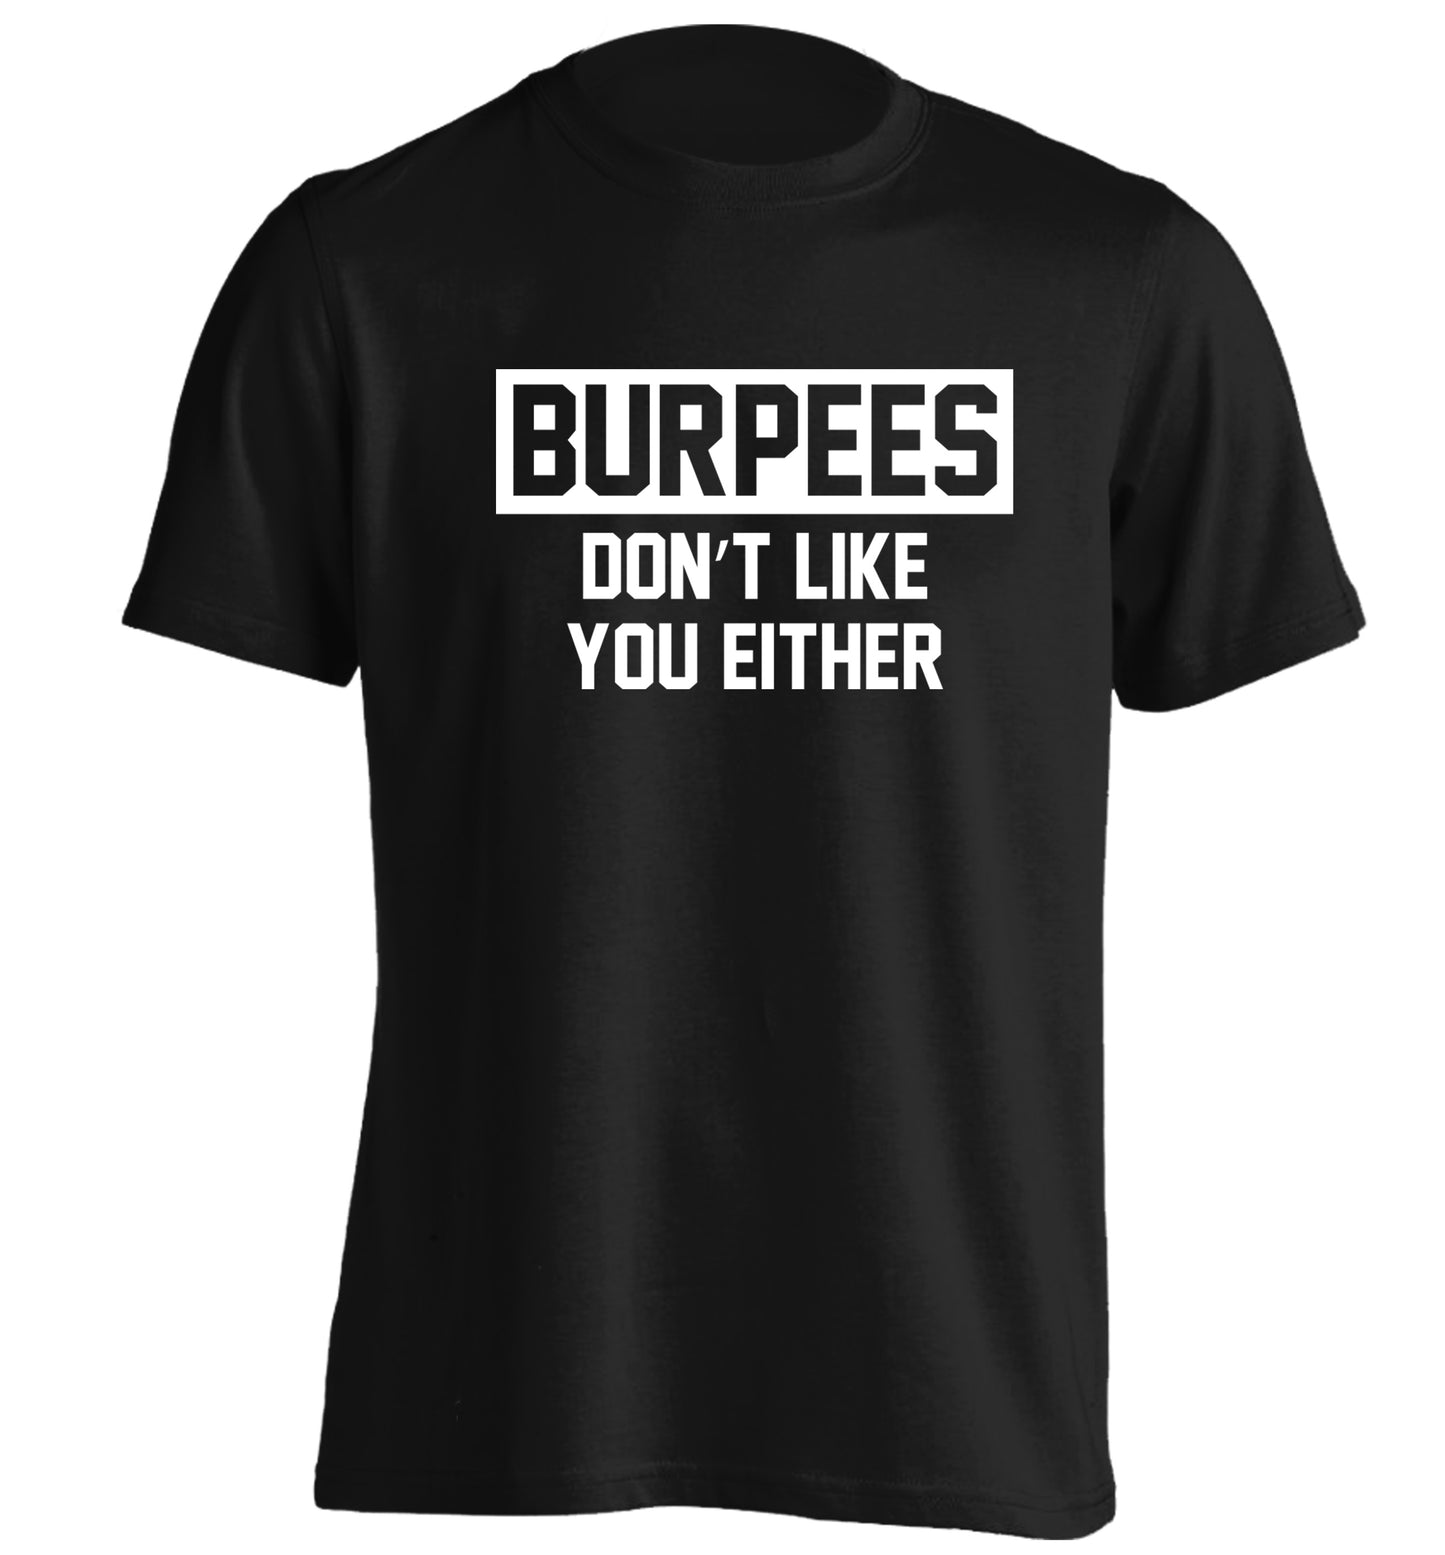 Burpees don't like you either adults unisex black Tshirt 2XL